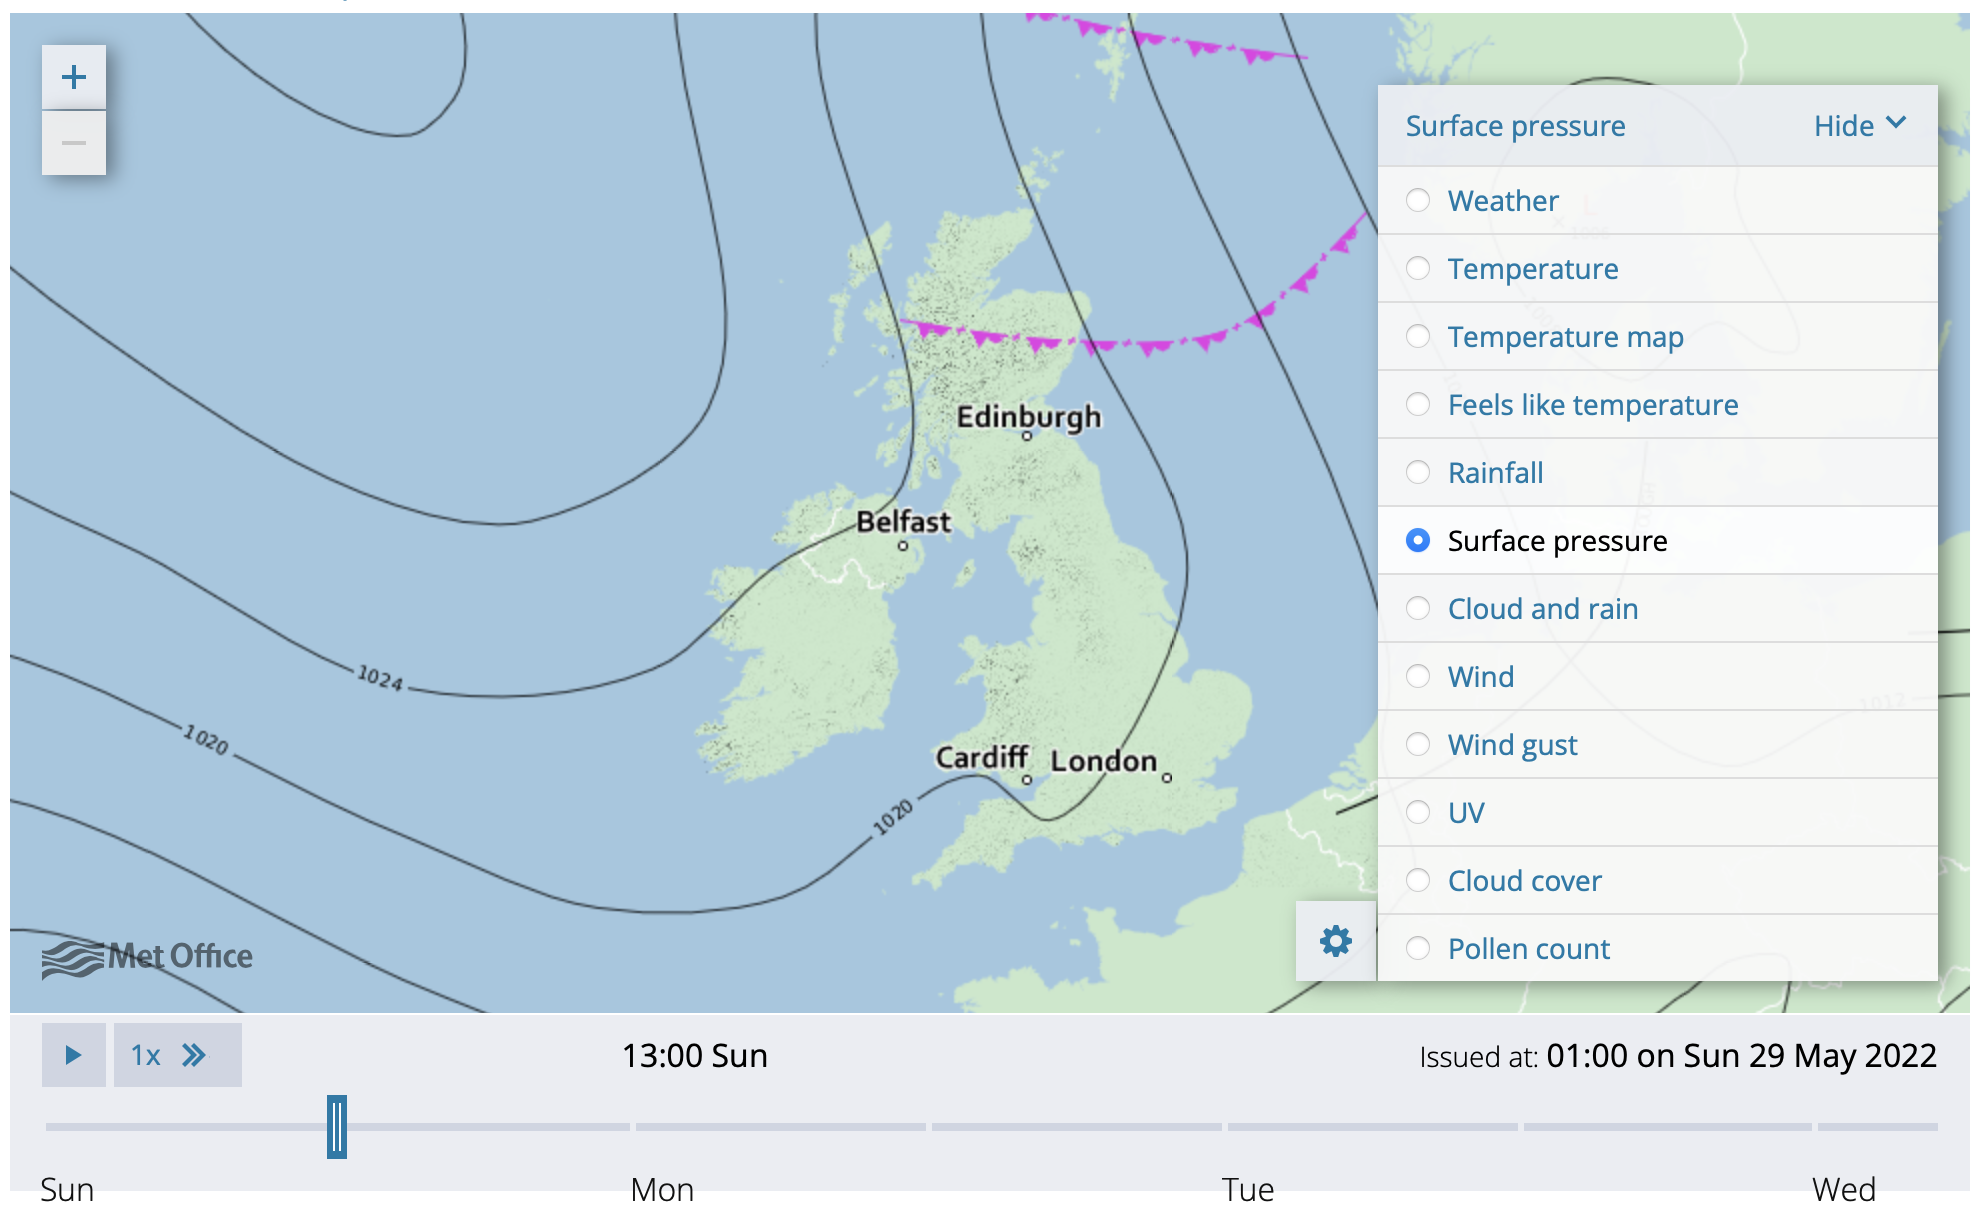 A screenshot of the Met Office website showing a typical synoptic chart of the UK